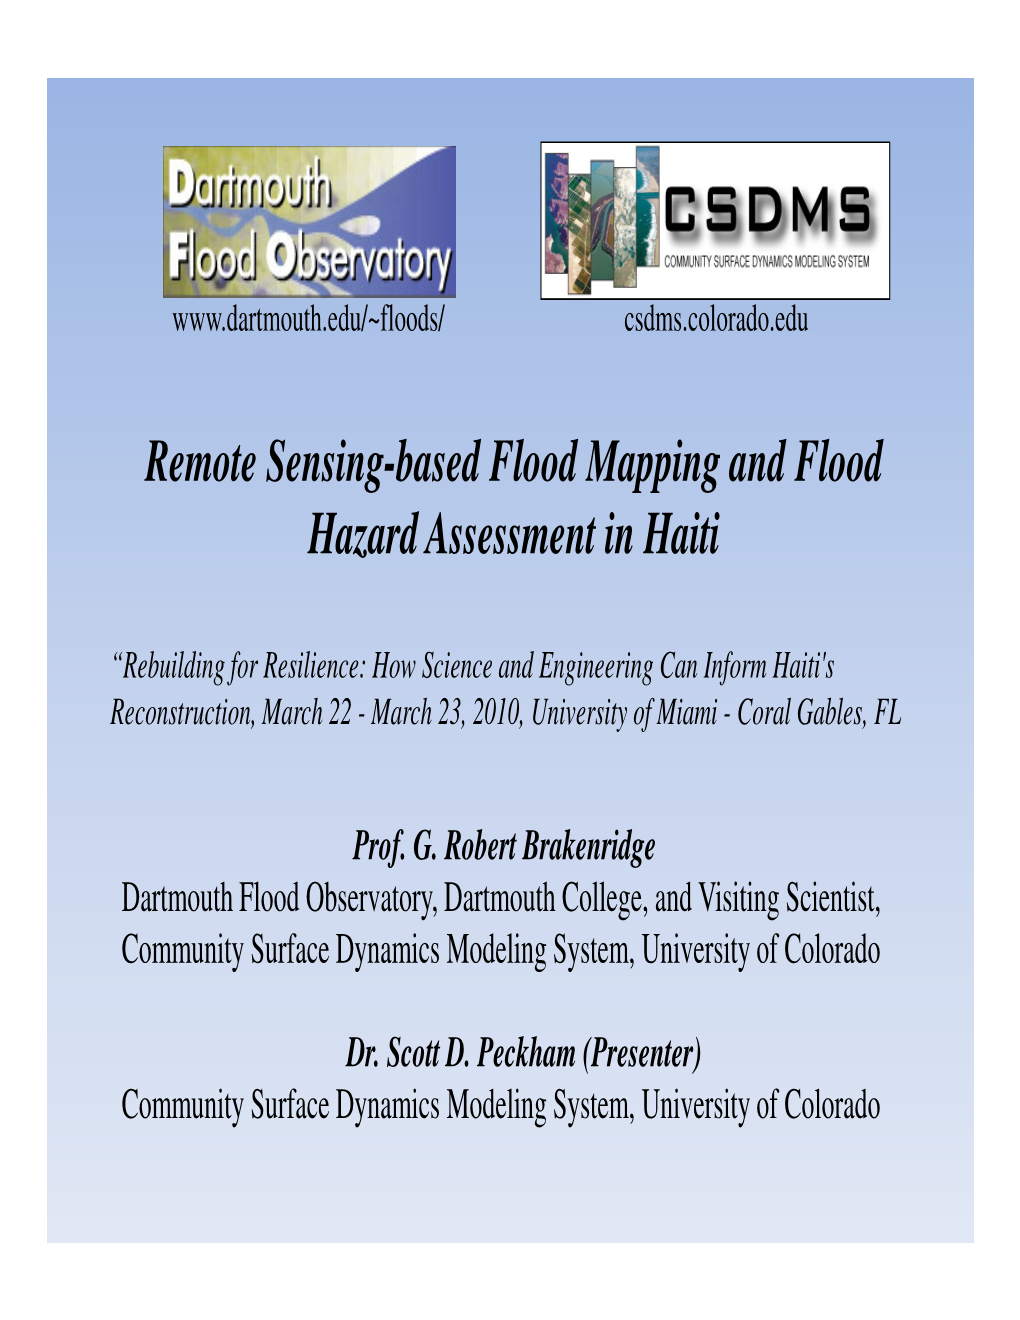 Remote Sensing-Based Flood Mapping and Flood Hazard Assessment in Haiti